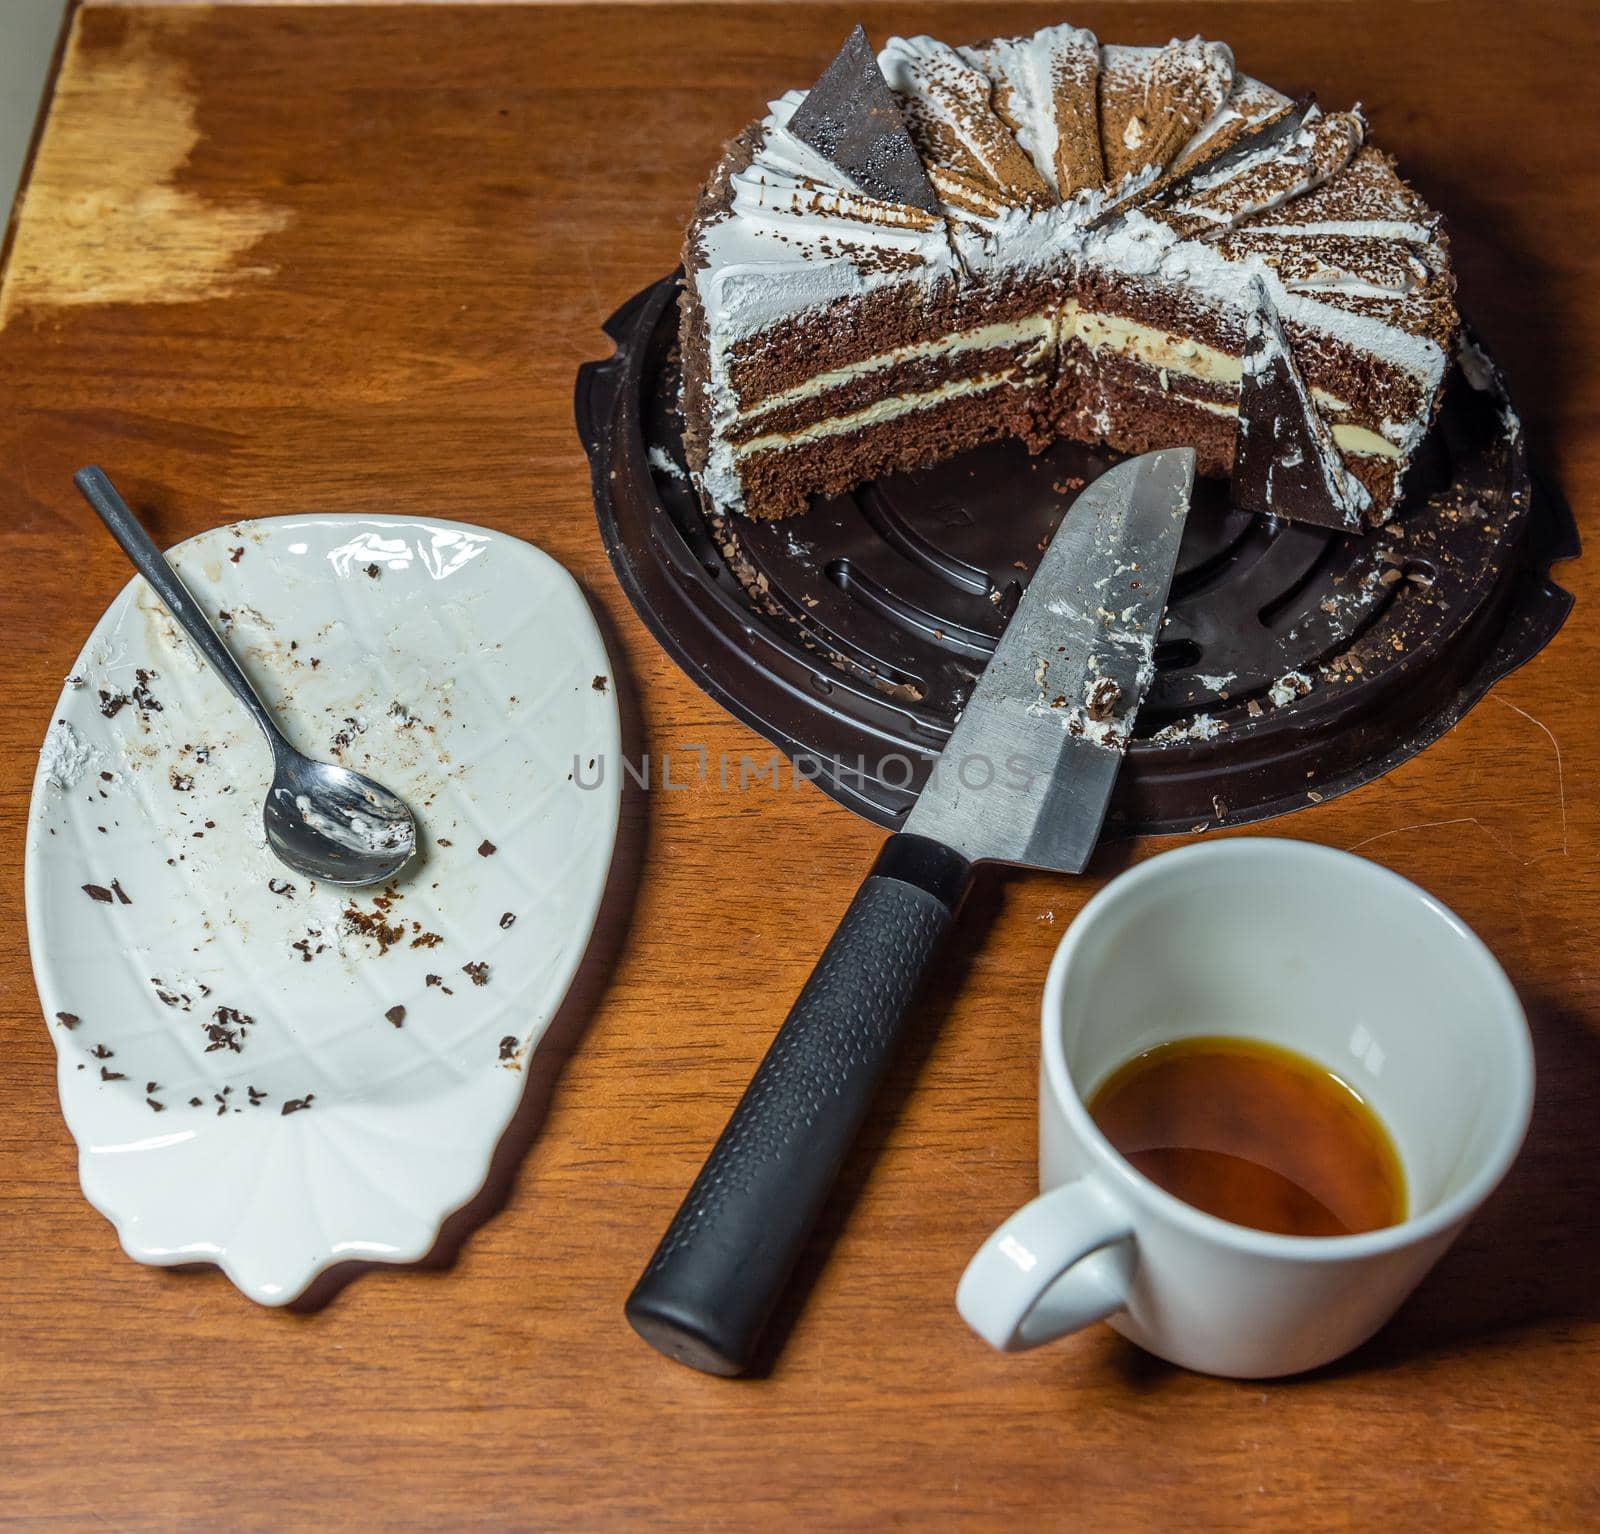 White plate with crumbs and a spoon after the cake, drinking a cup of coffee and a cut cake on a wooden table, top view.